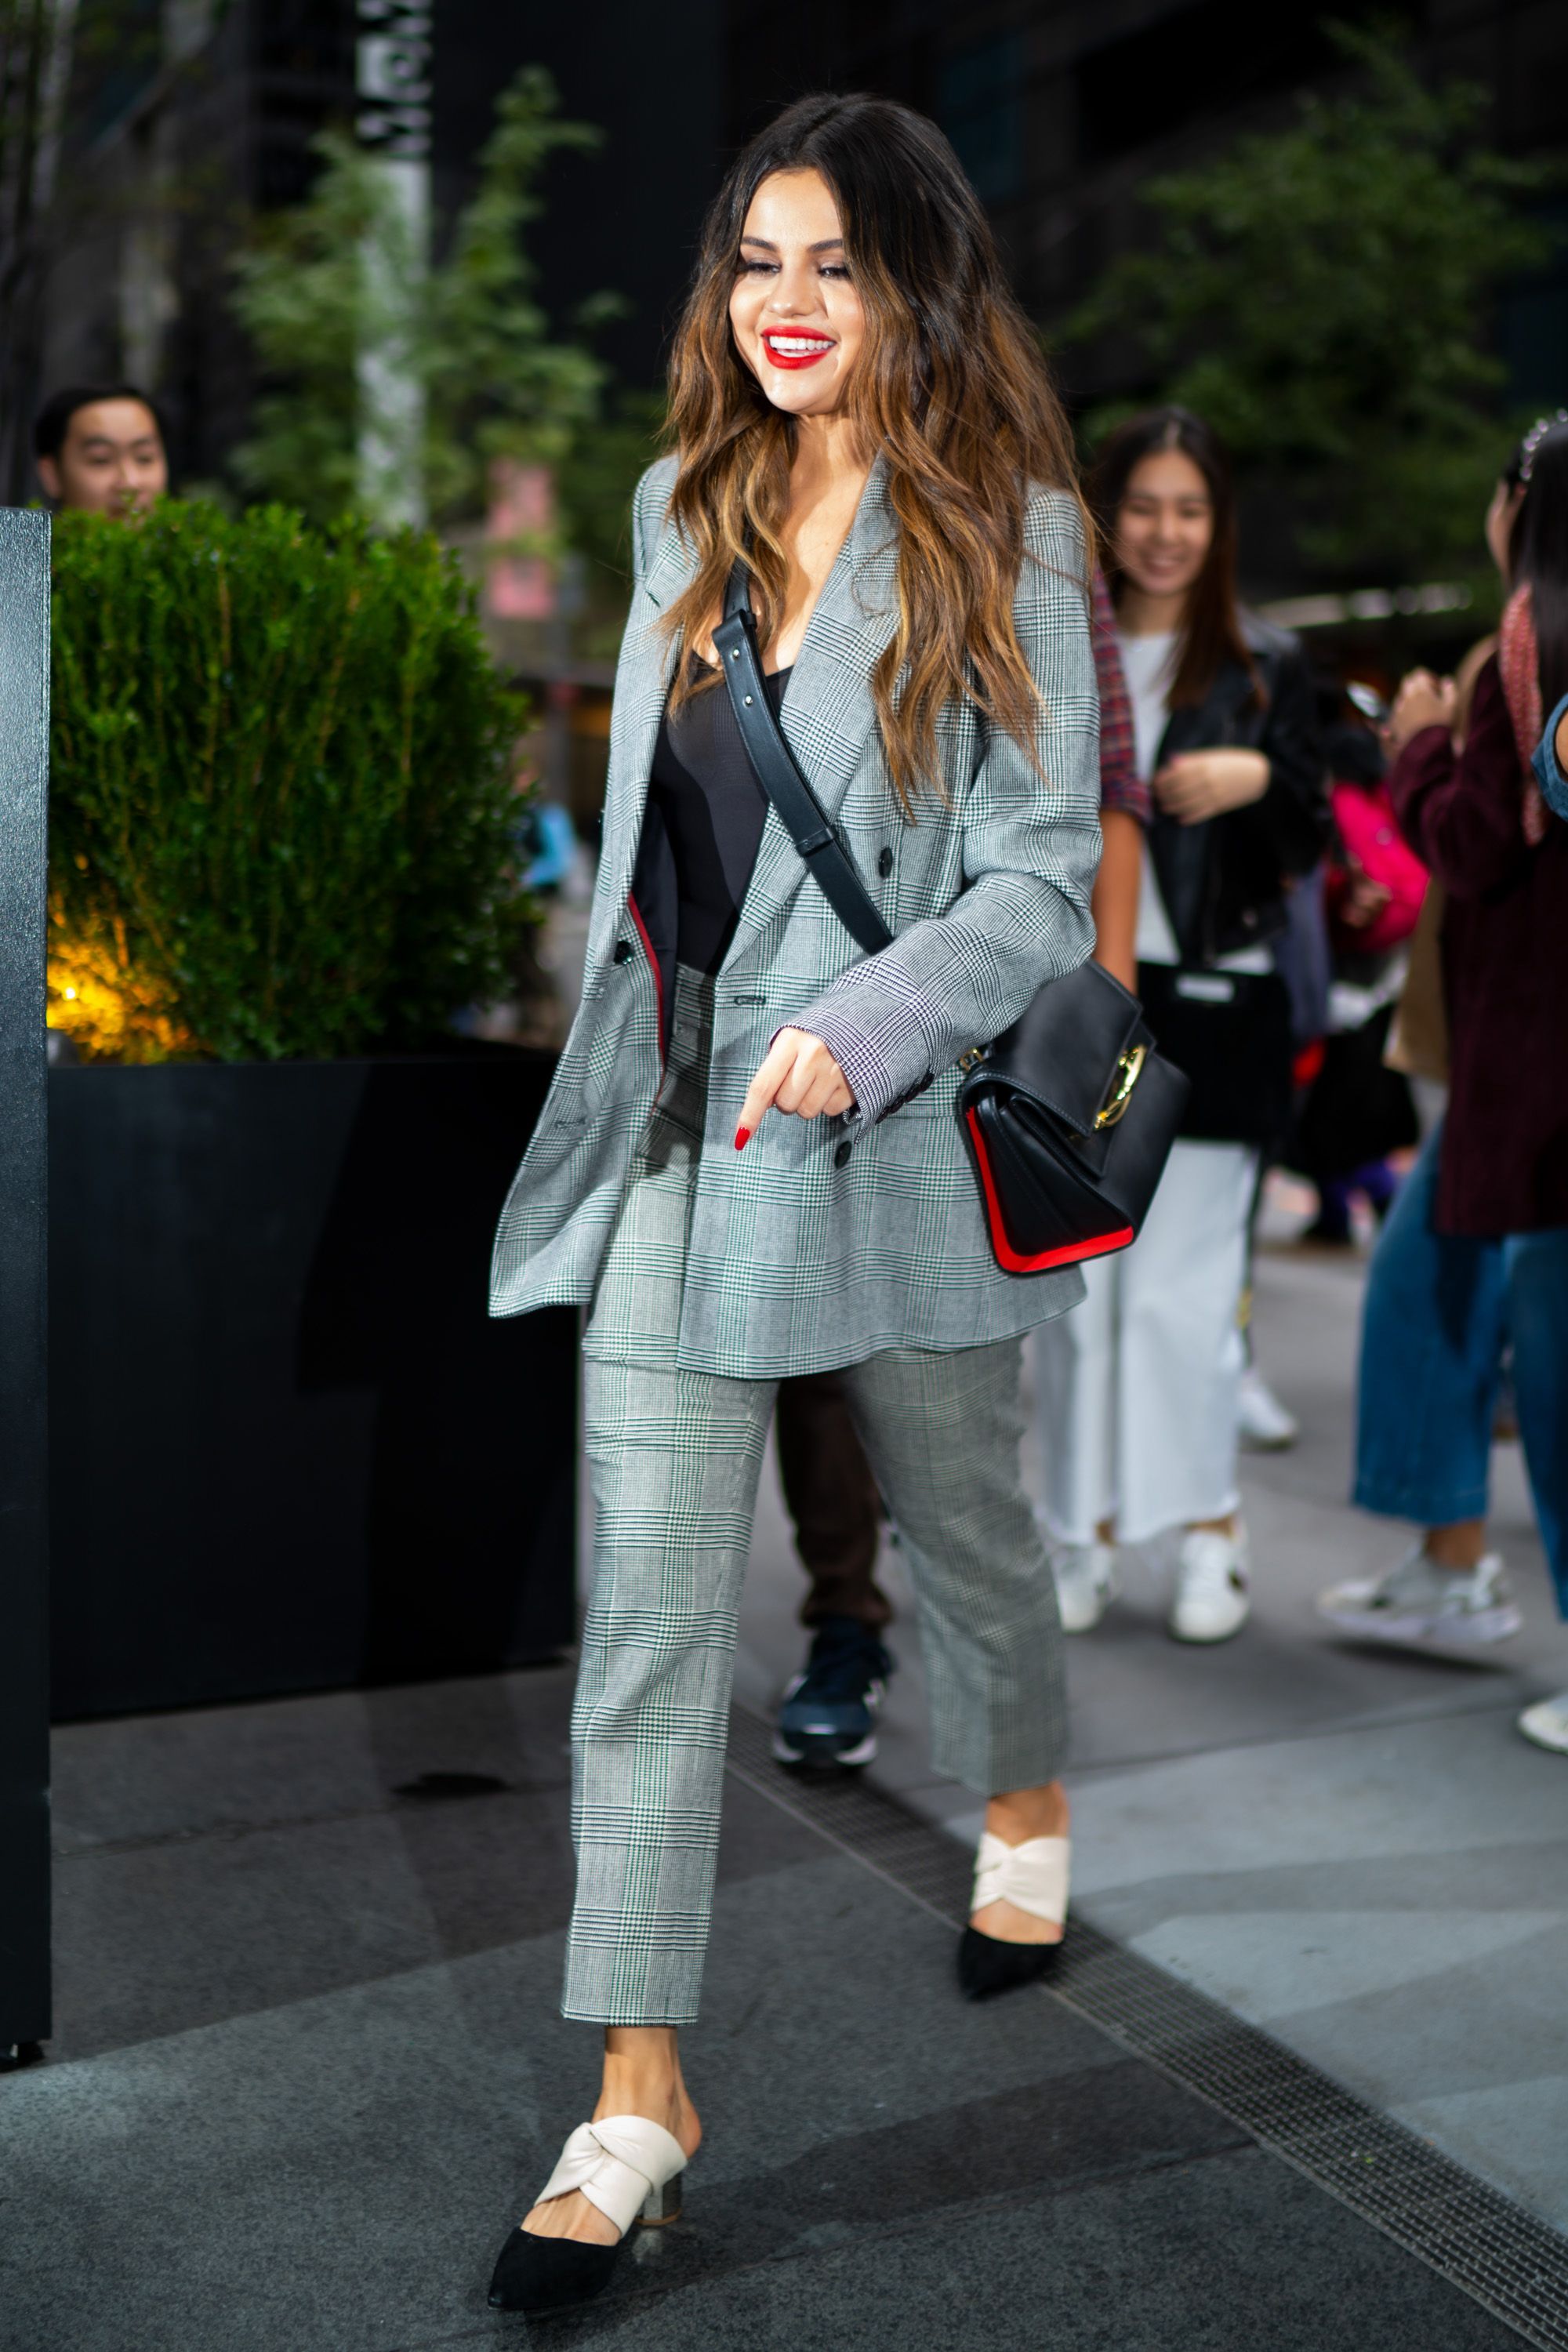 Best Selena Gomez Outfits – Cutest Selena Gomez Looks and Street Style